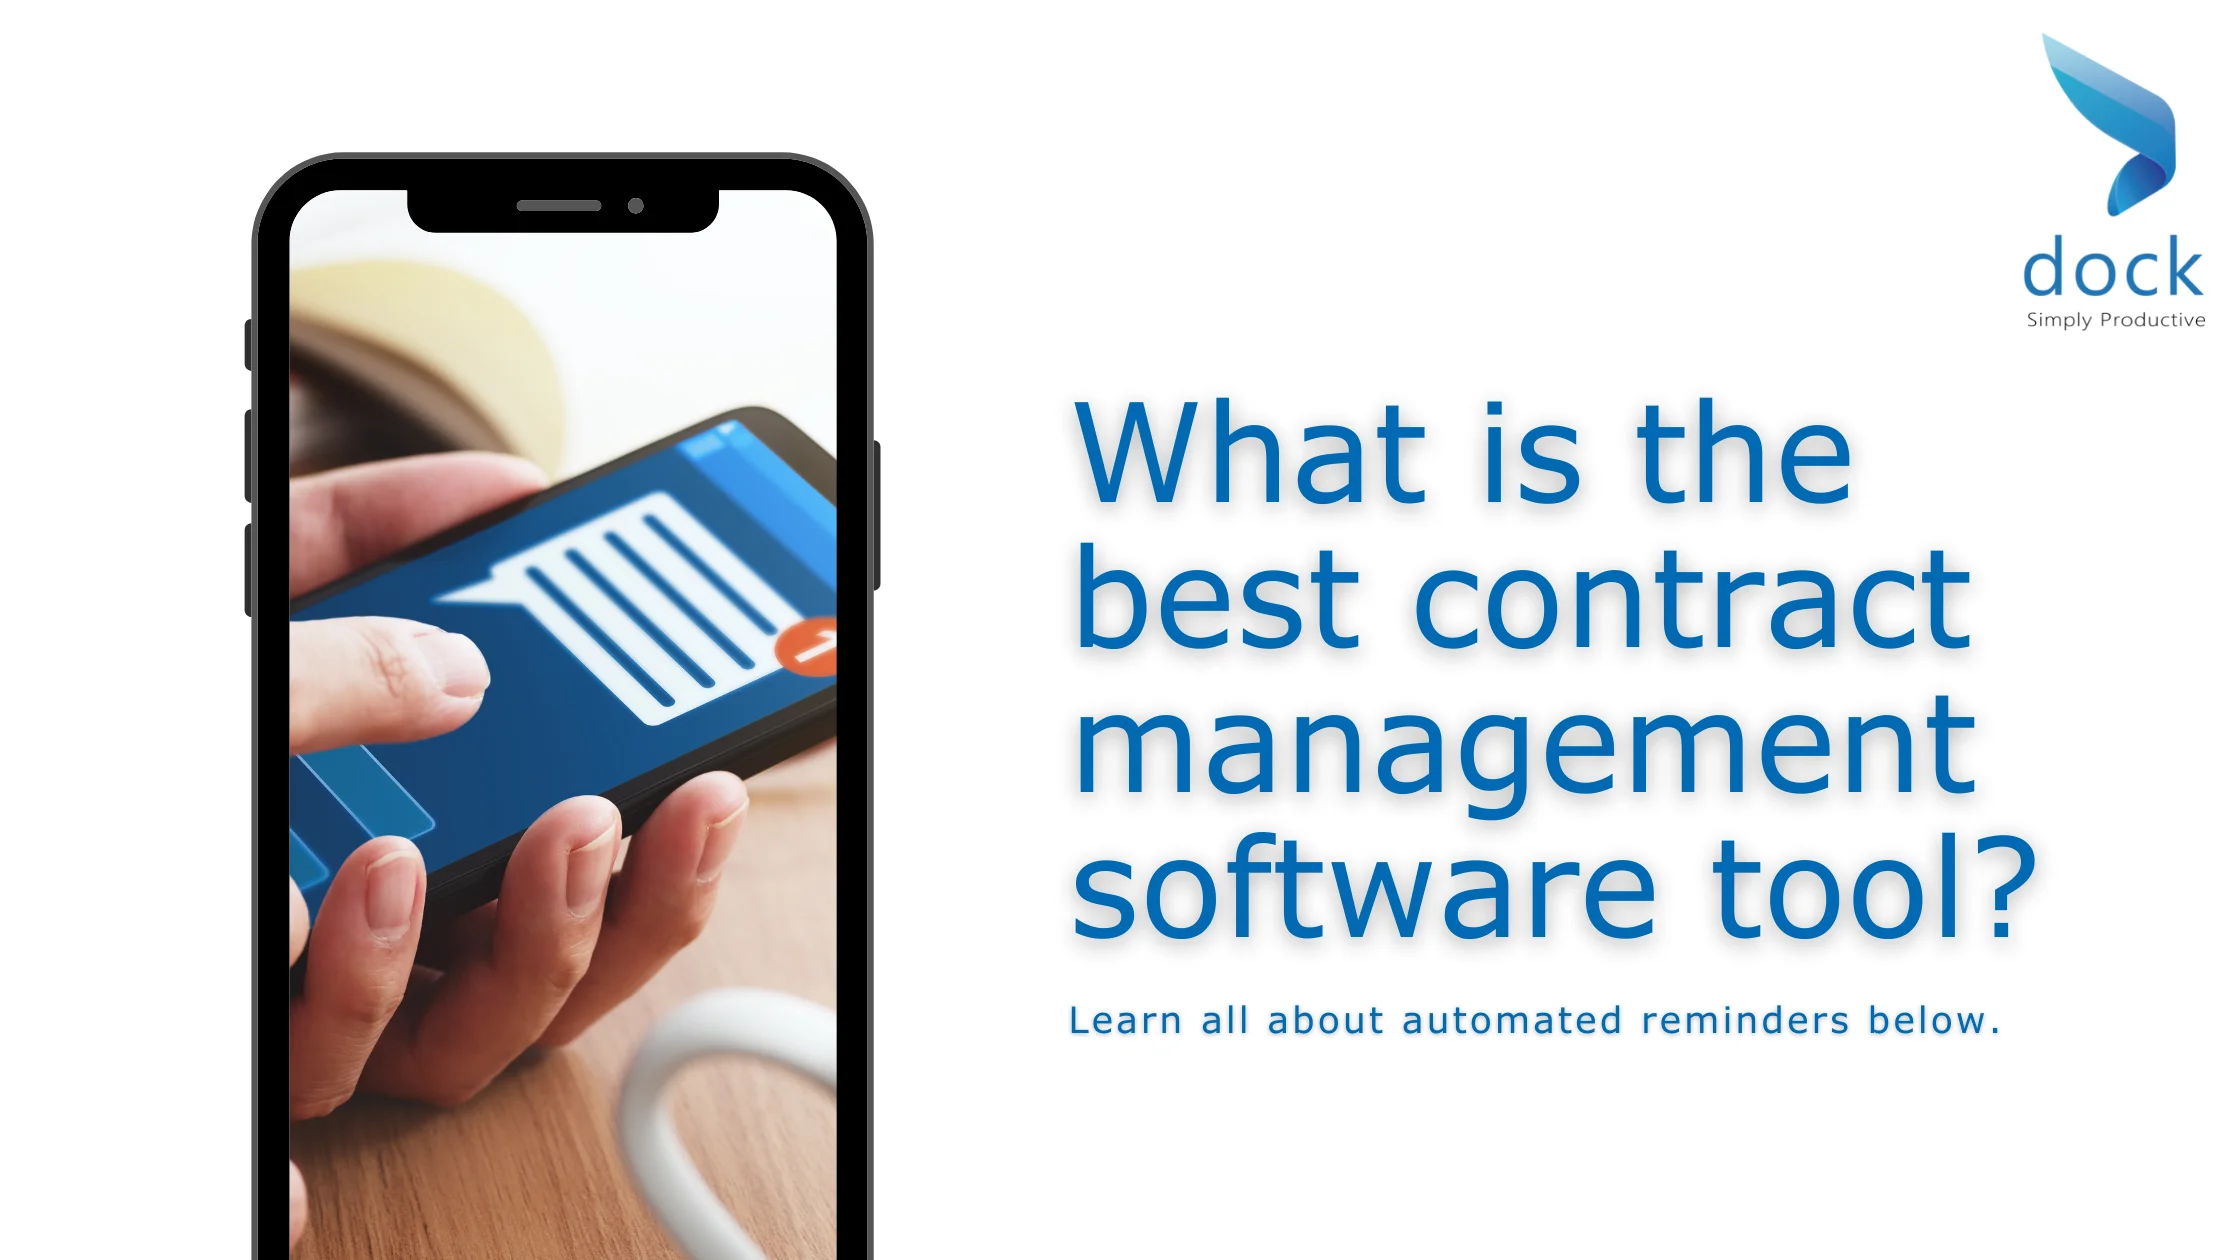 What is the best contract management software tool